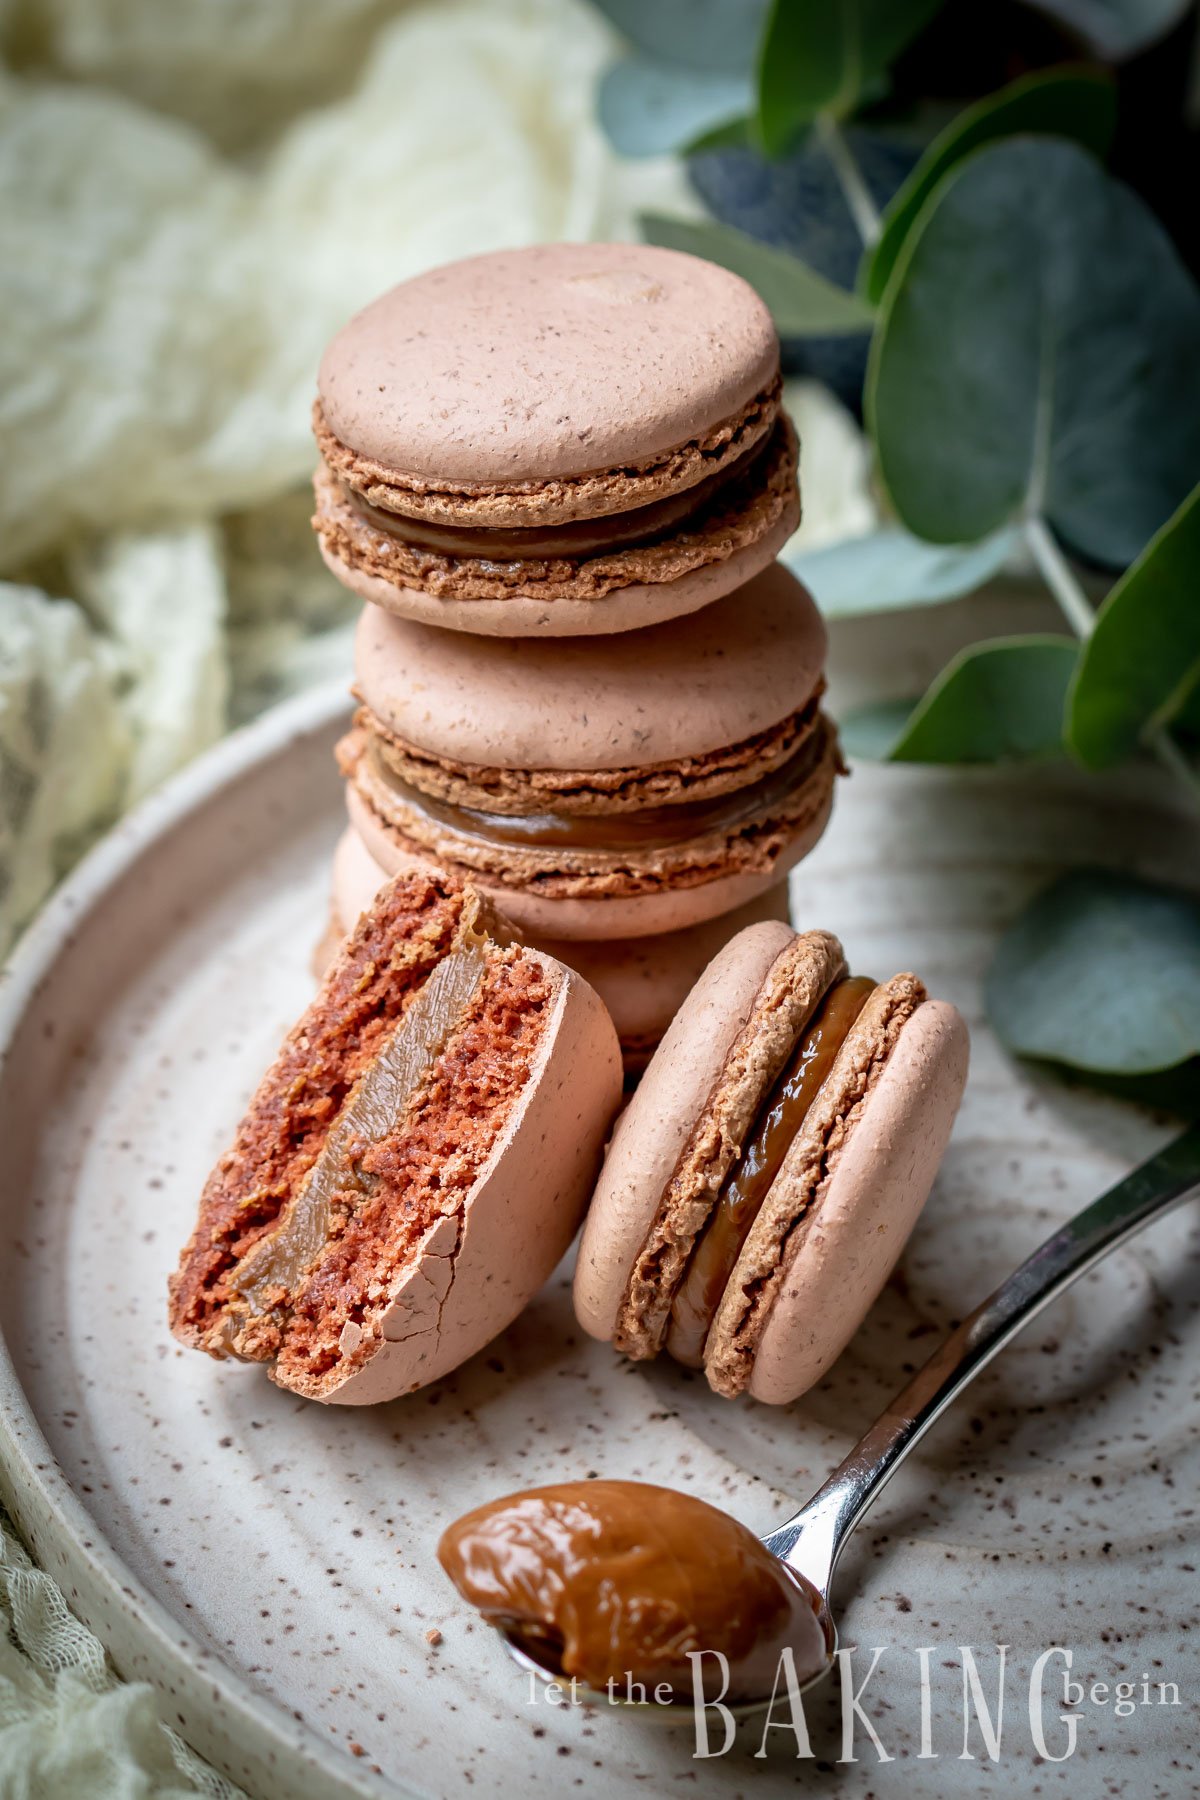 Dulce de Leche Macaron Recipe uses Italian Macaron Shell recipe and dulce de leche as the filling. Using dulce de leche as the macaron filling is the most genius thing, since it's easy and of course - super delicious.